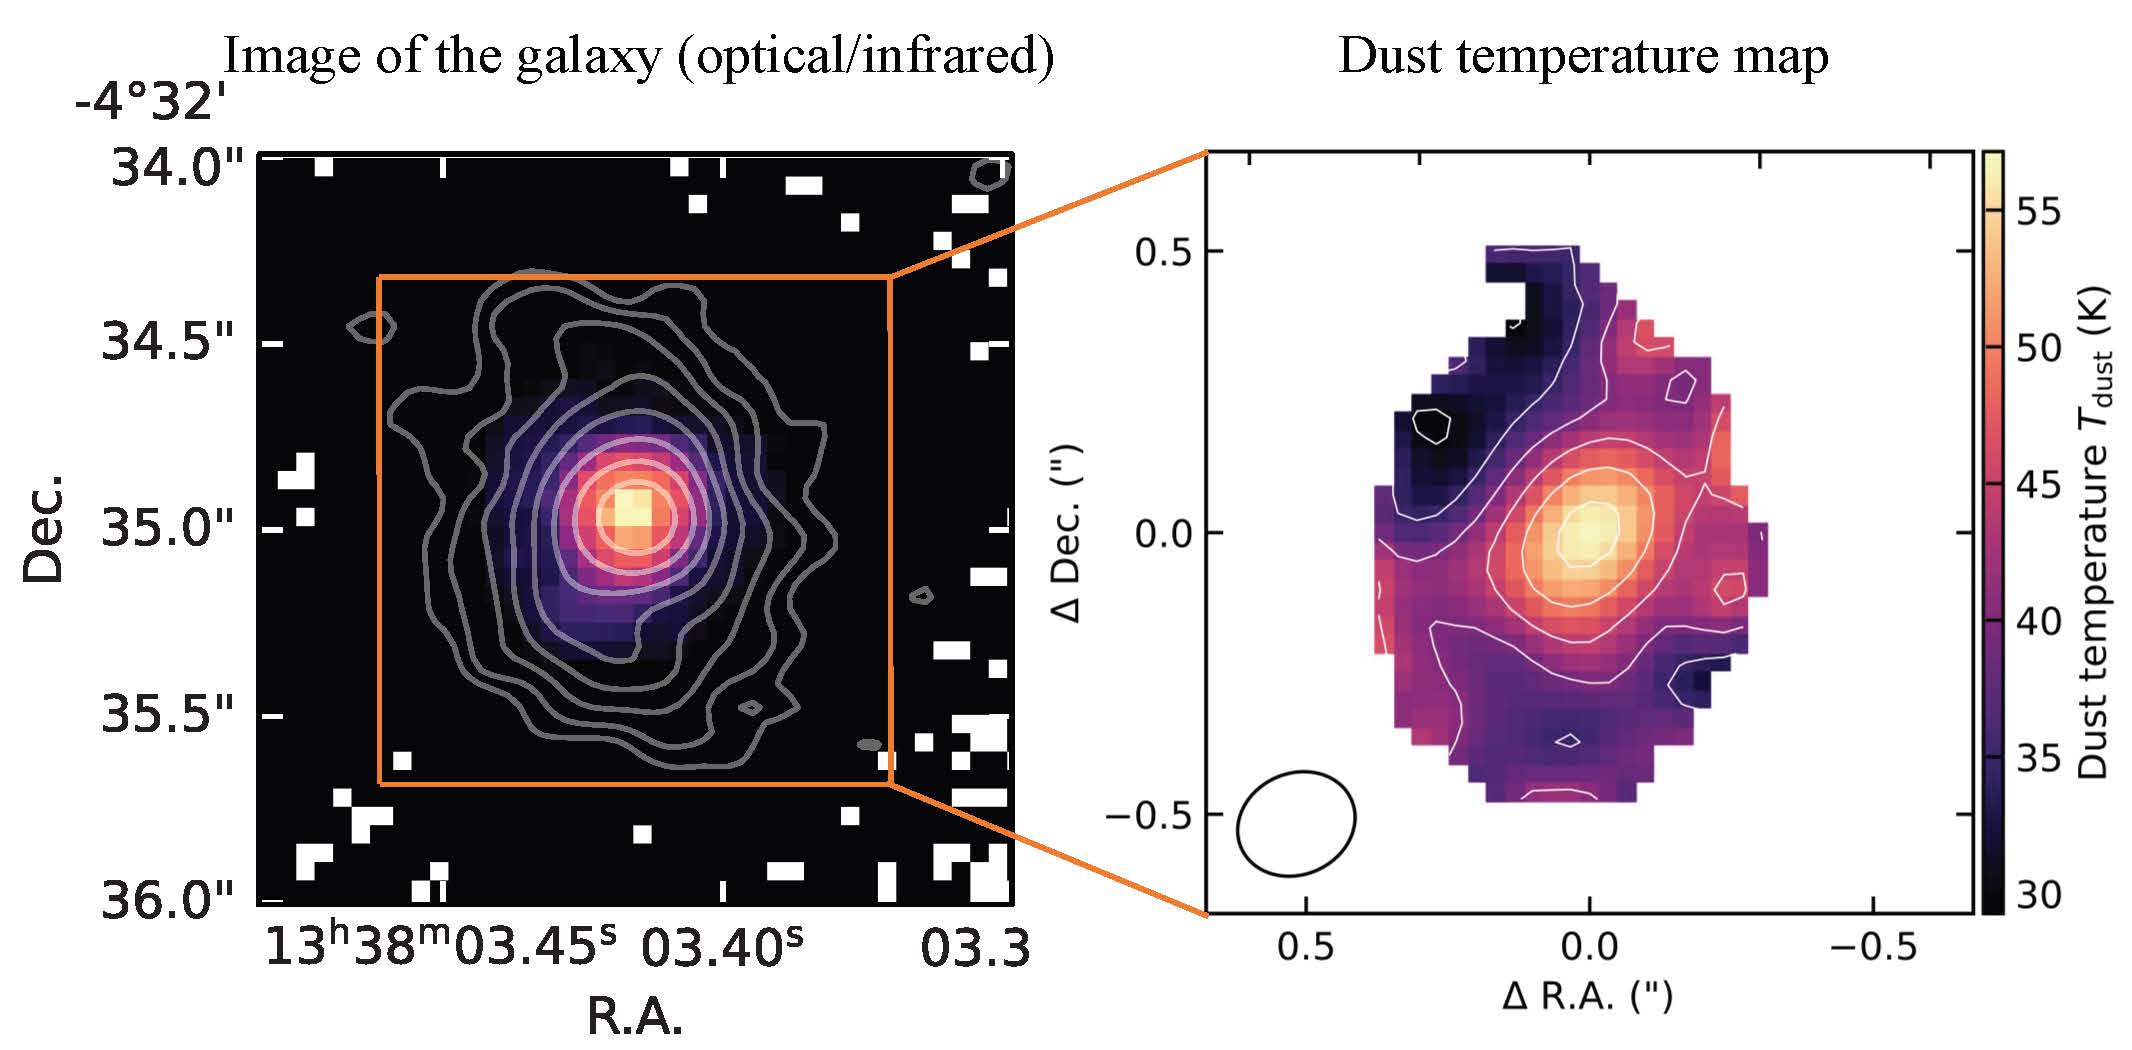 HST/ALMA image of the galaxy BRI 1335-0417 and temperature distribution